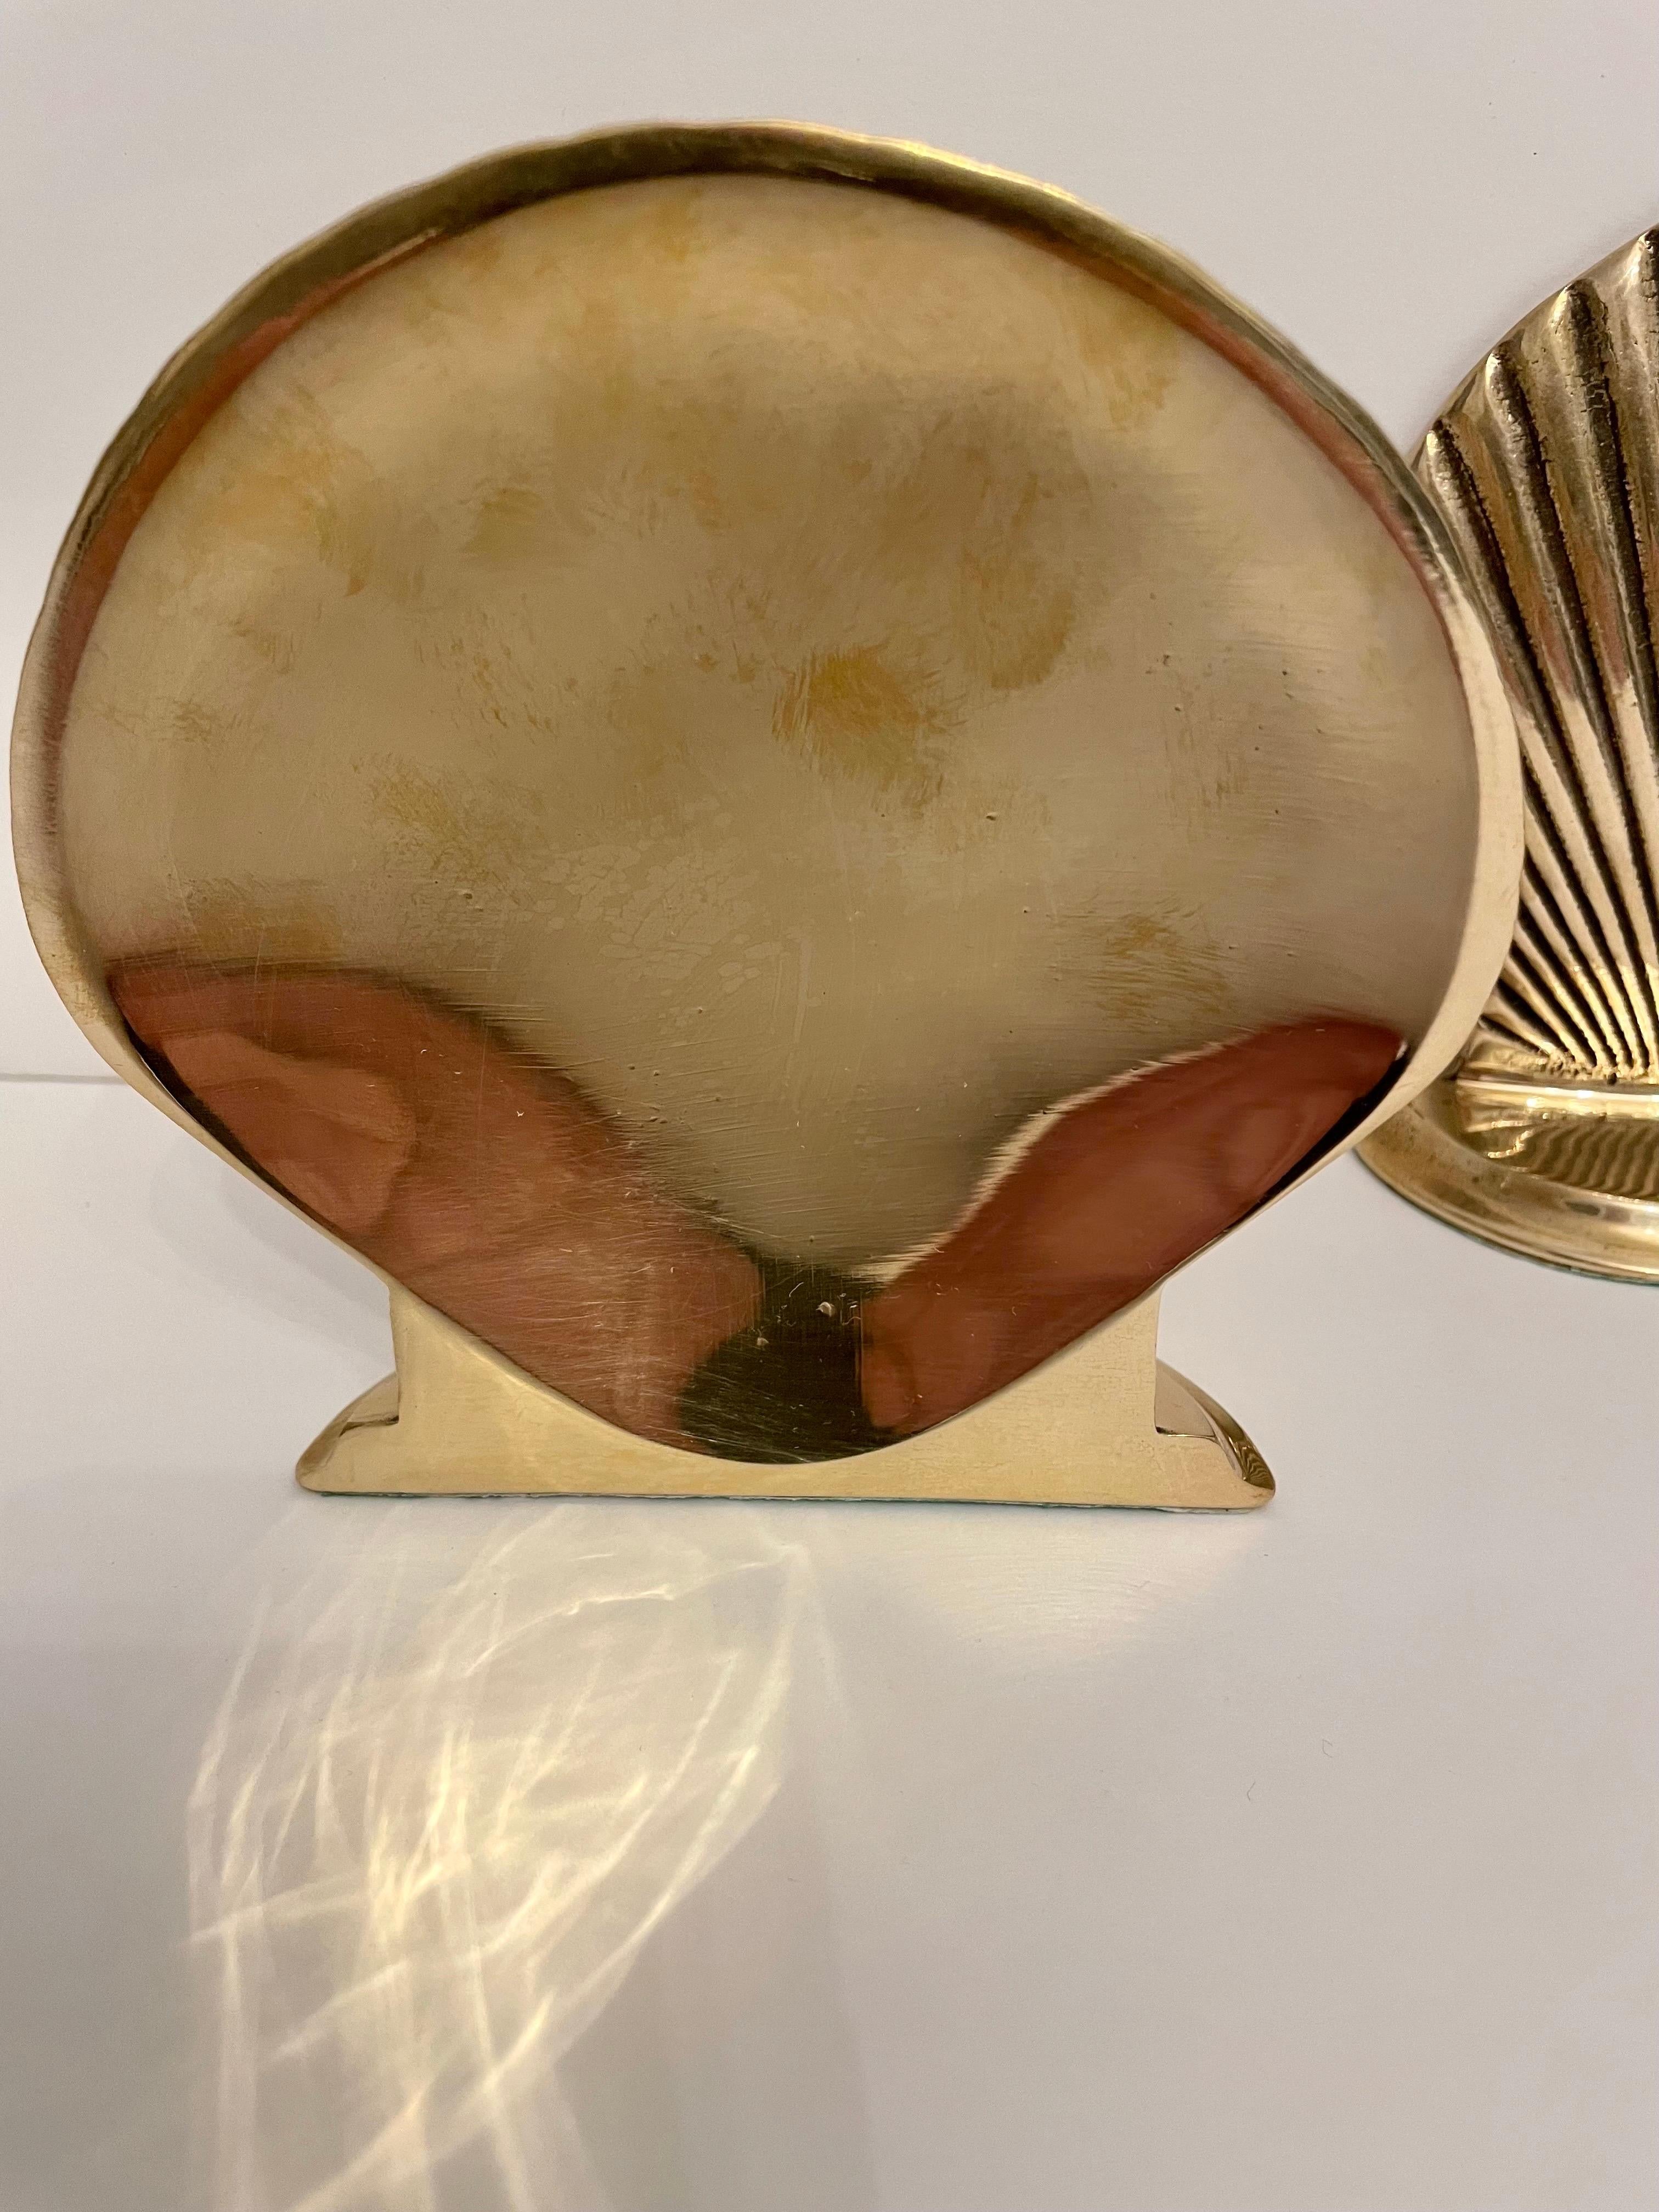 20th Century Vintage Brass Clam Shell Seashell Bookends For Sale